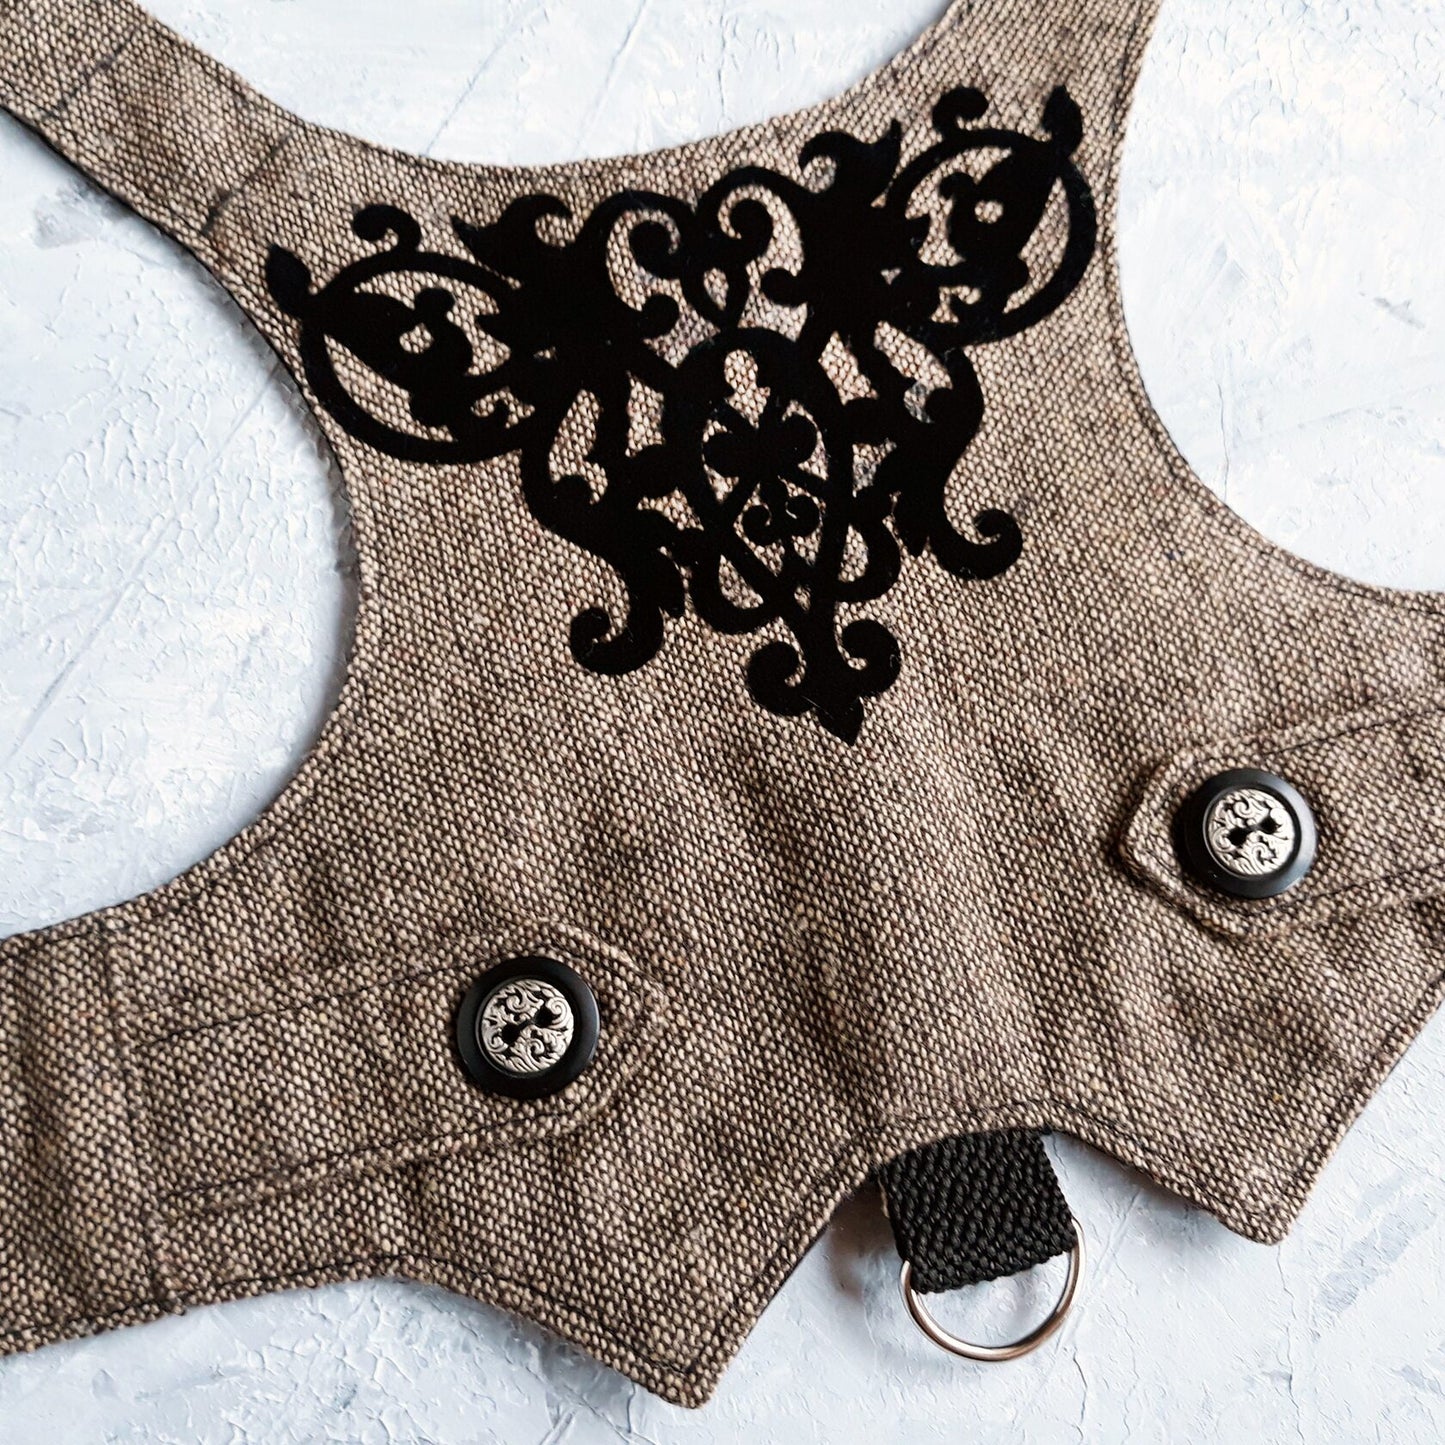 Difficult to escape cat harness with velvety openwork design